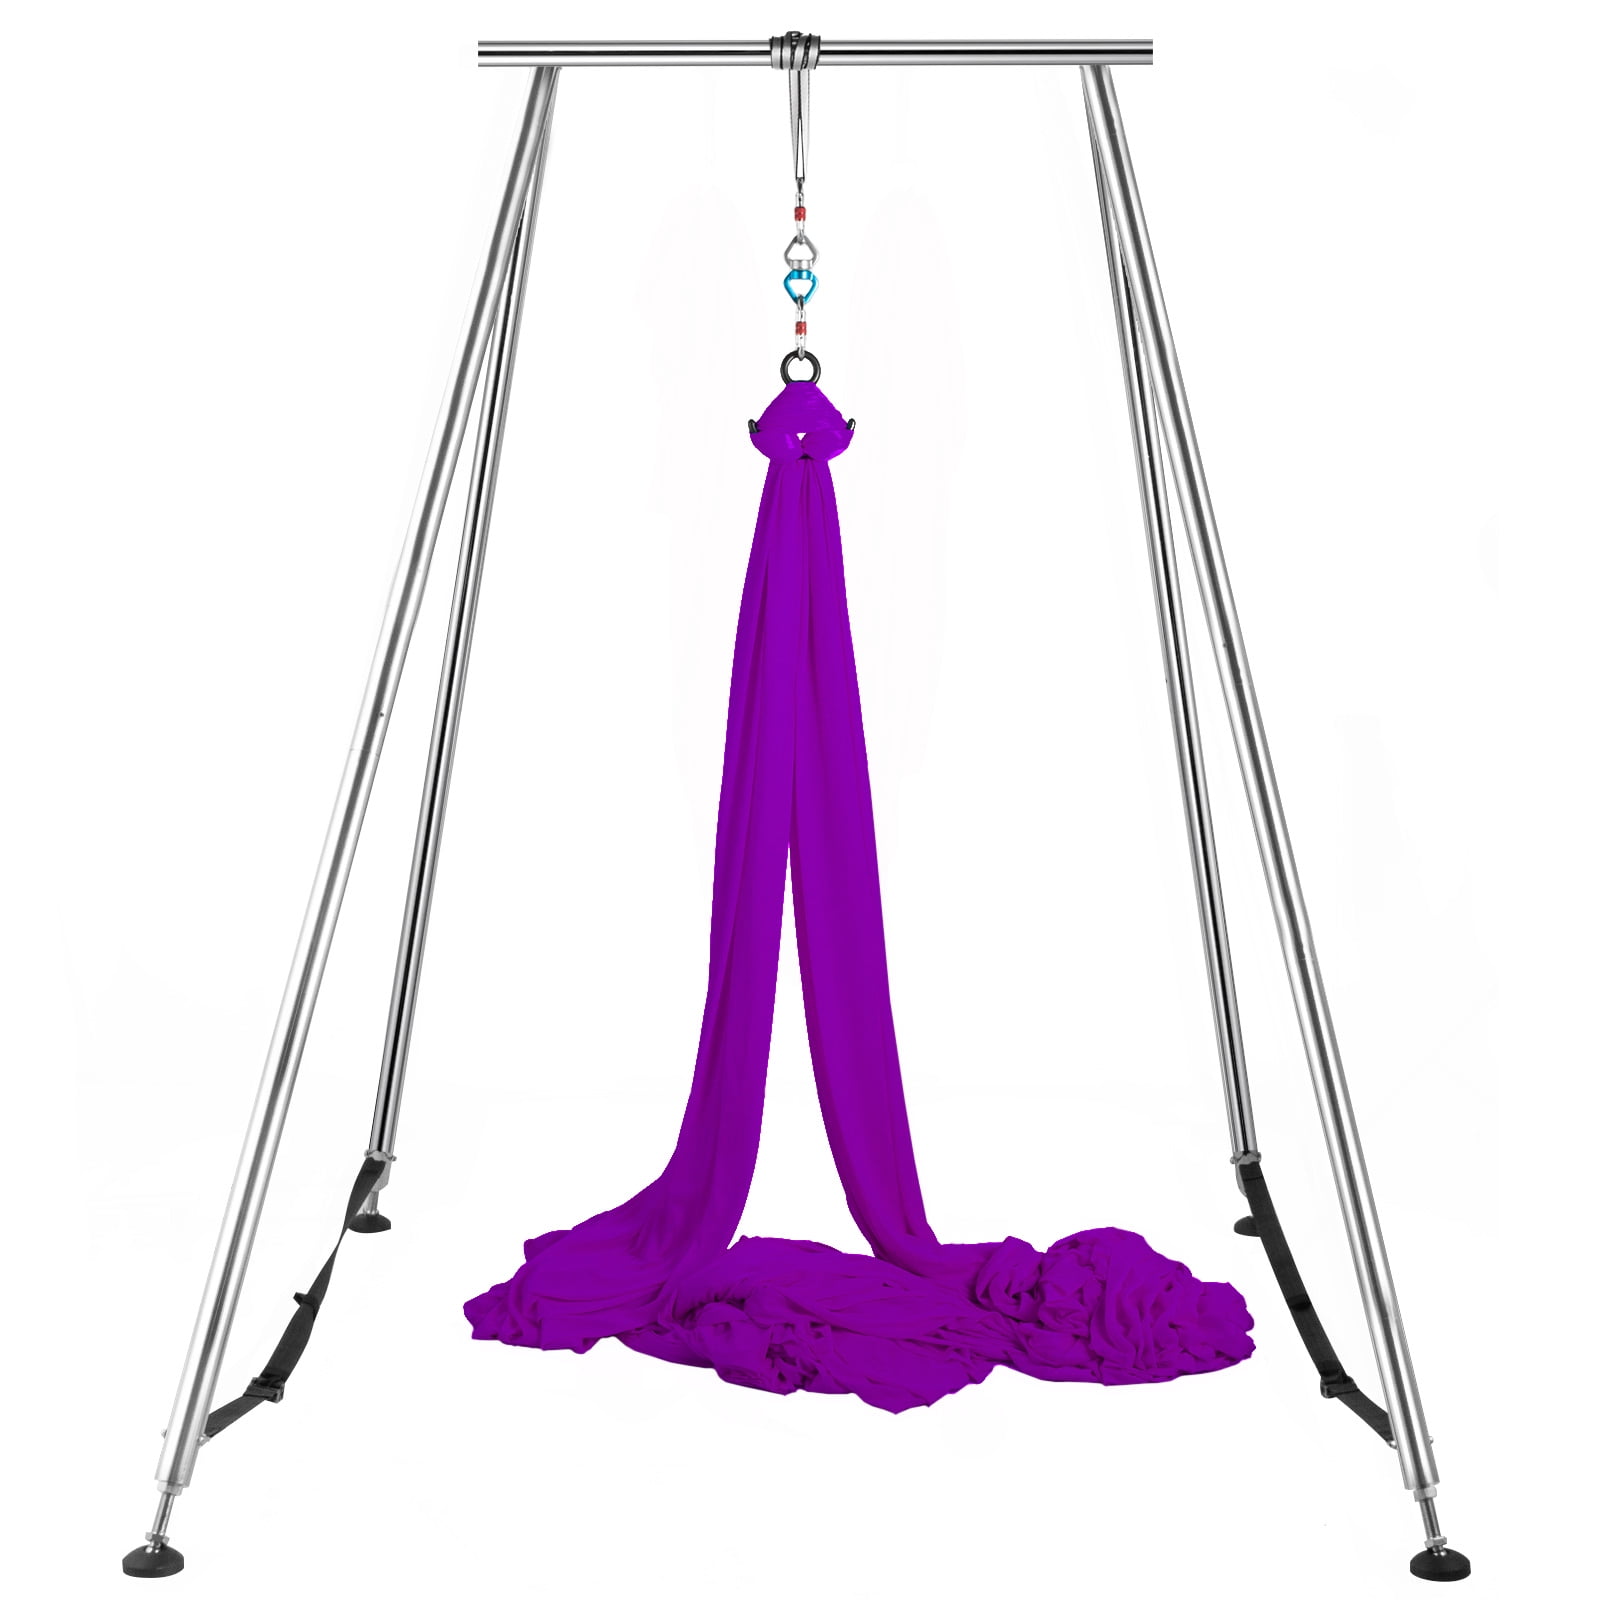 YOGABODY Yoga Trapeze Pro – Yoga Inversion Swing with Free Video Series and  Pose Chart, Purple